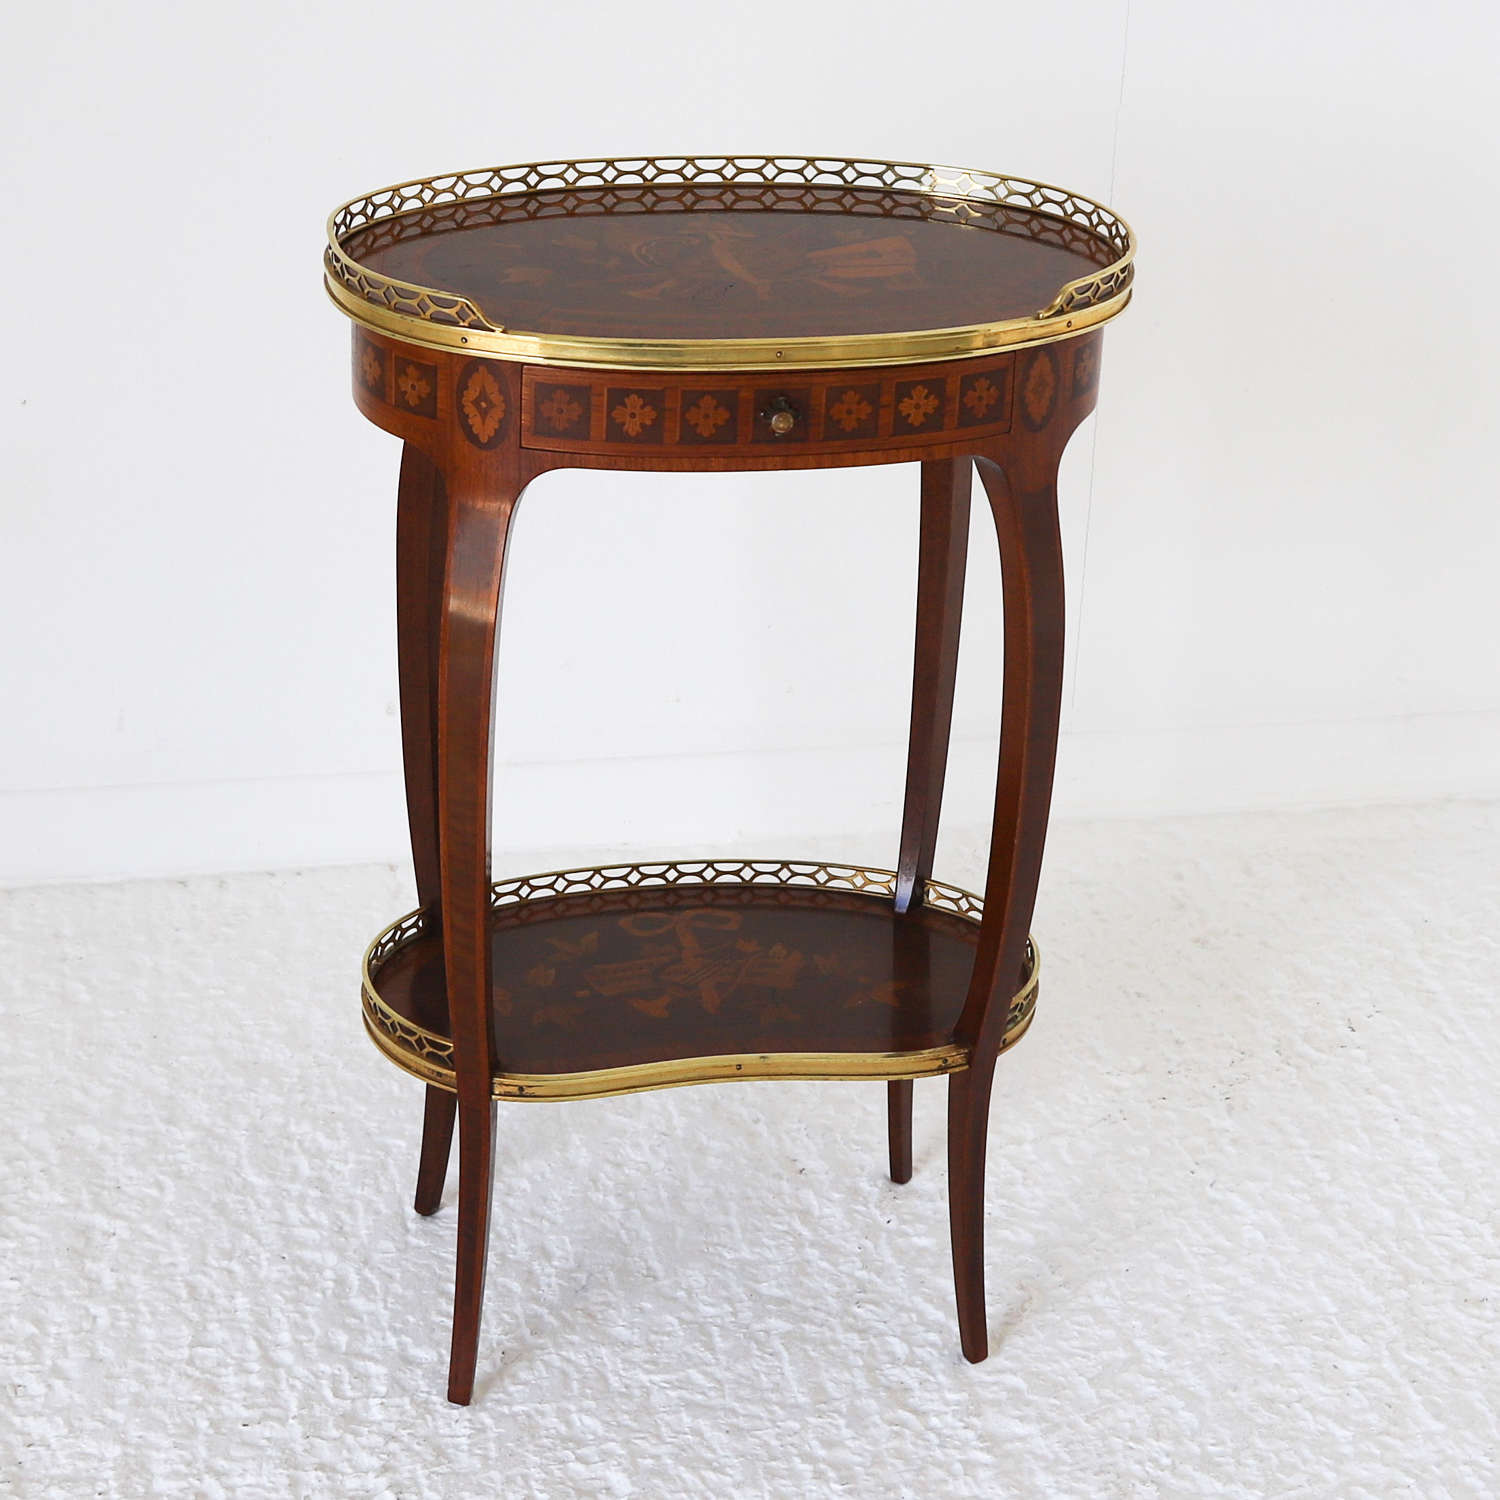 French c1890-1910 Oval Ambulante Table with fine marquetry inlay